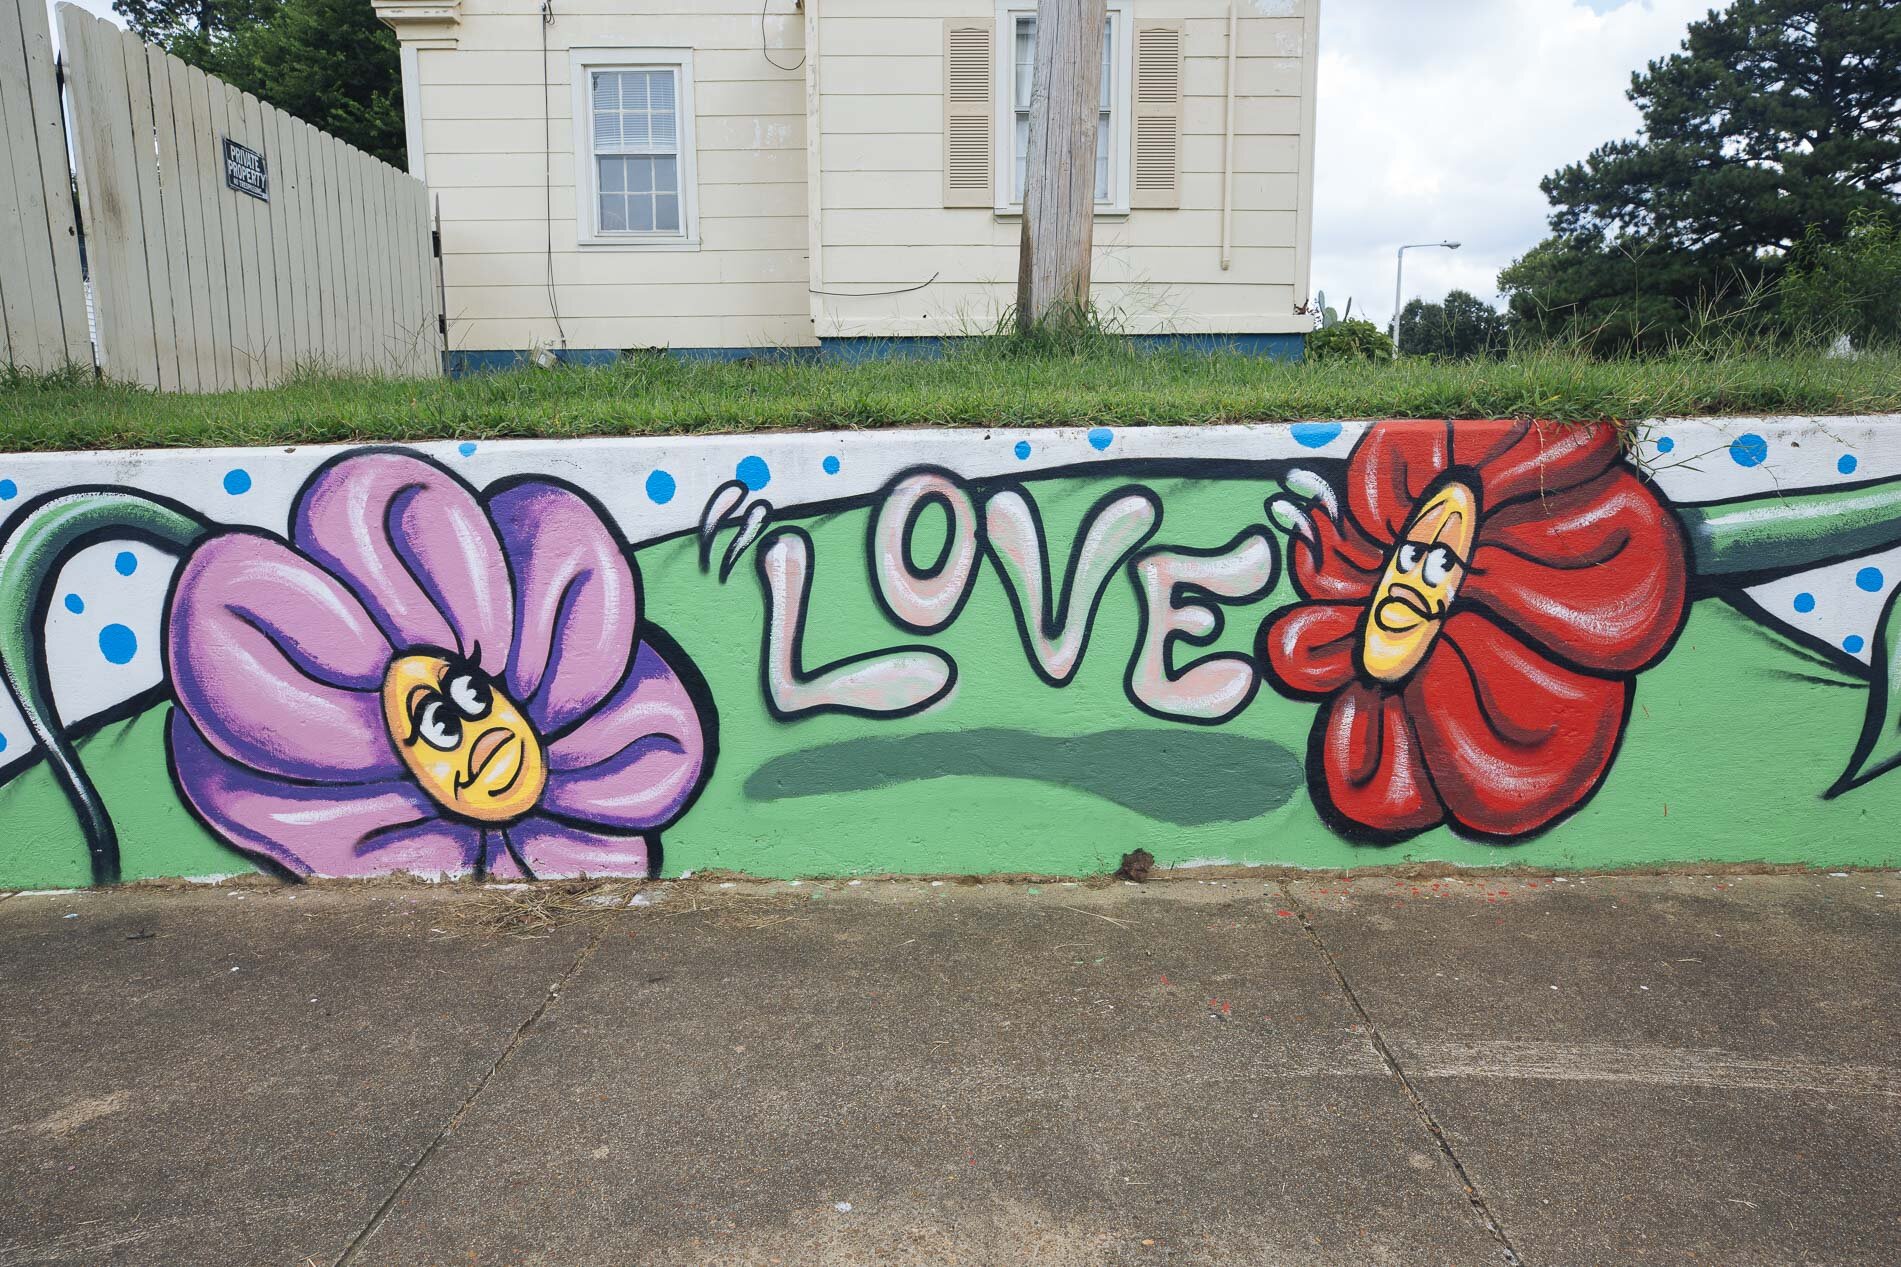 A mural adorns a retaining wall behind Treadwell elementary and middle schools in The Heights. (Ziggy Mack)